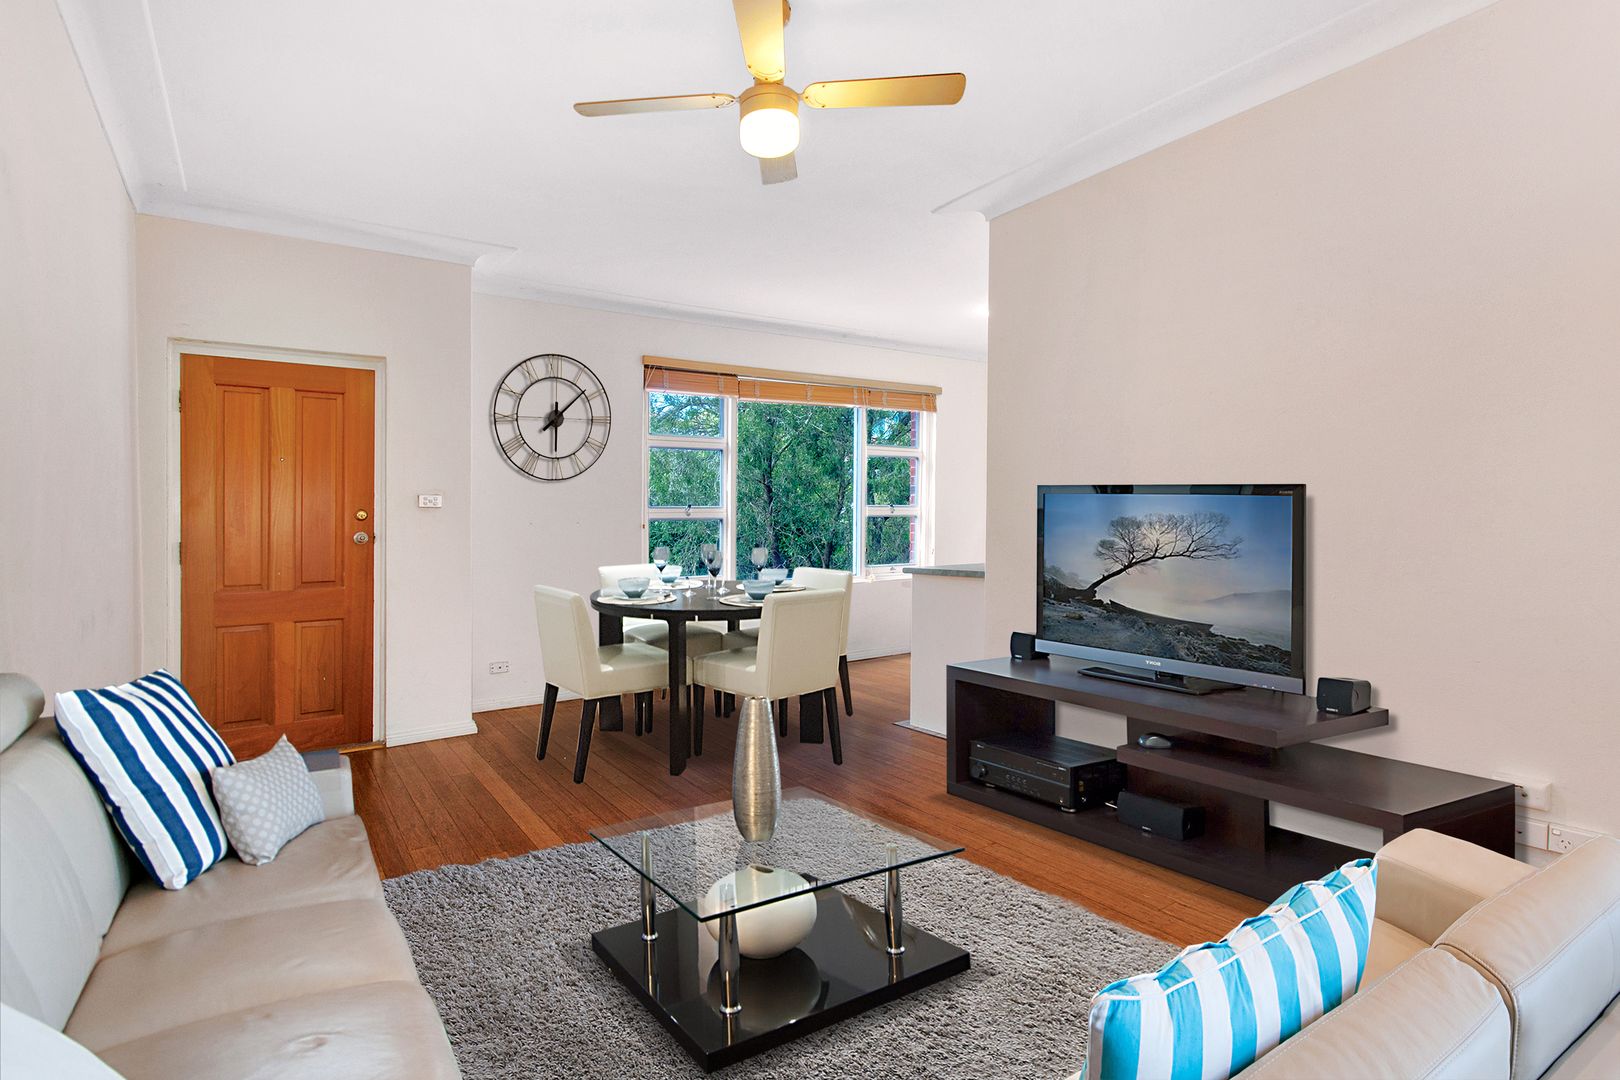 2 bedrooms Apartment / Unit / Flat in 3/127 Woodland Street BALGOWLAH NSW, 2093